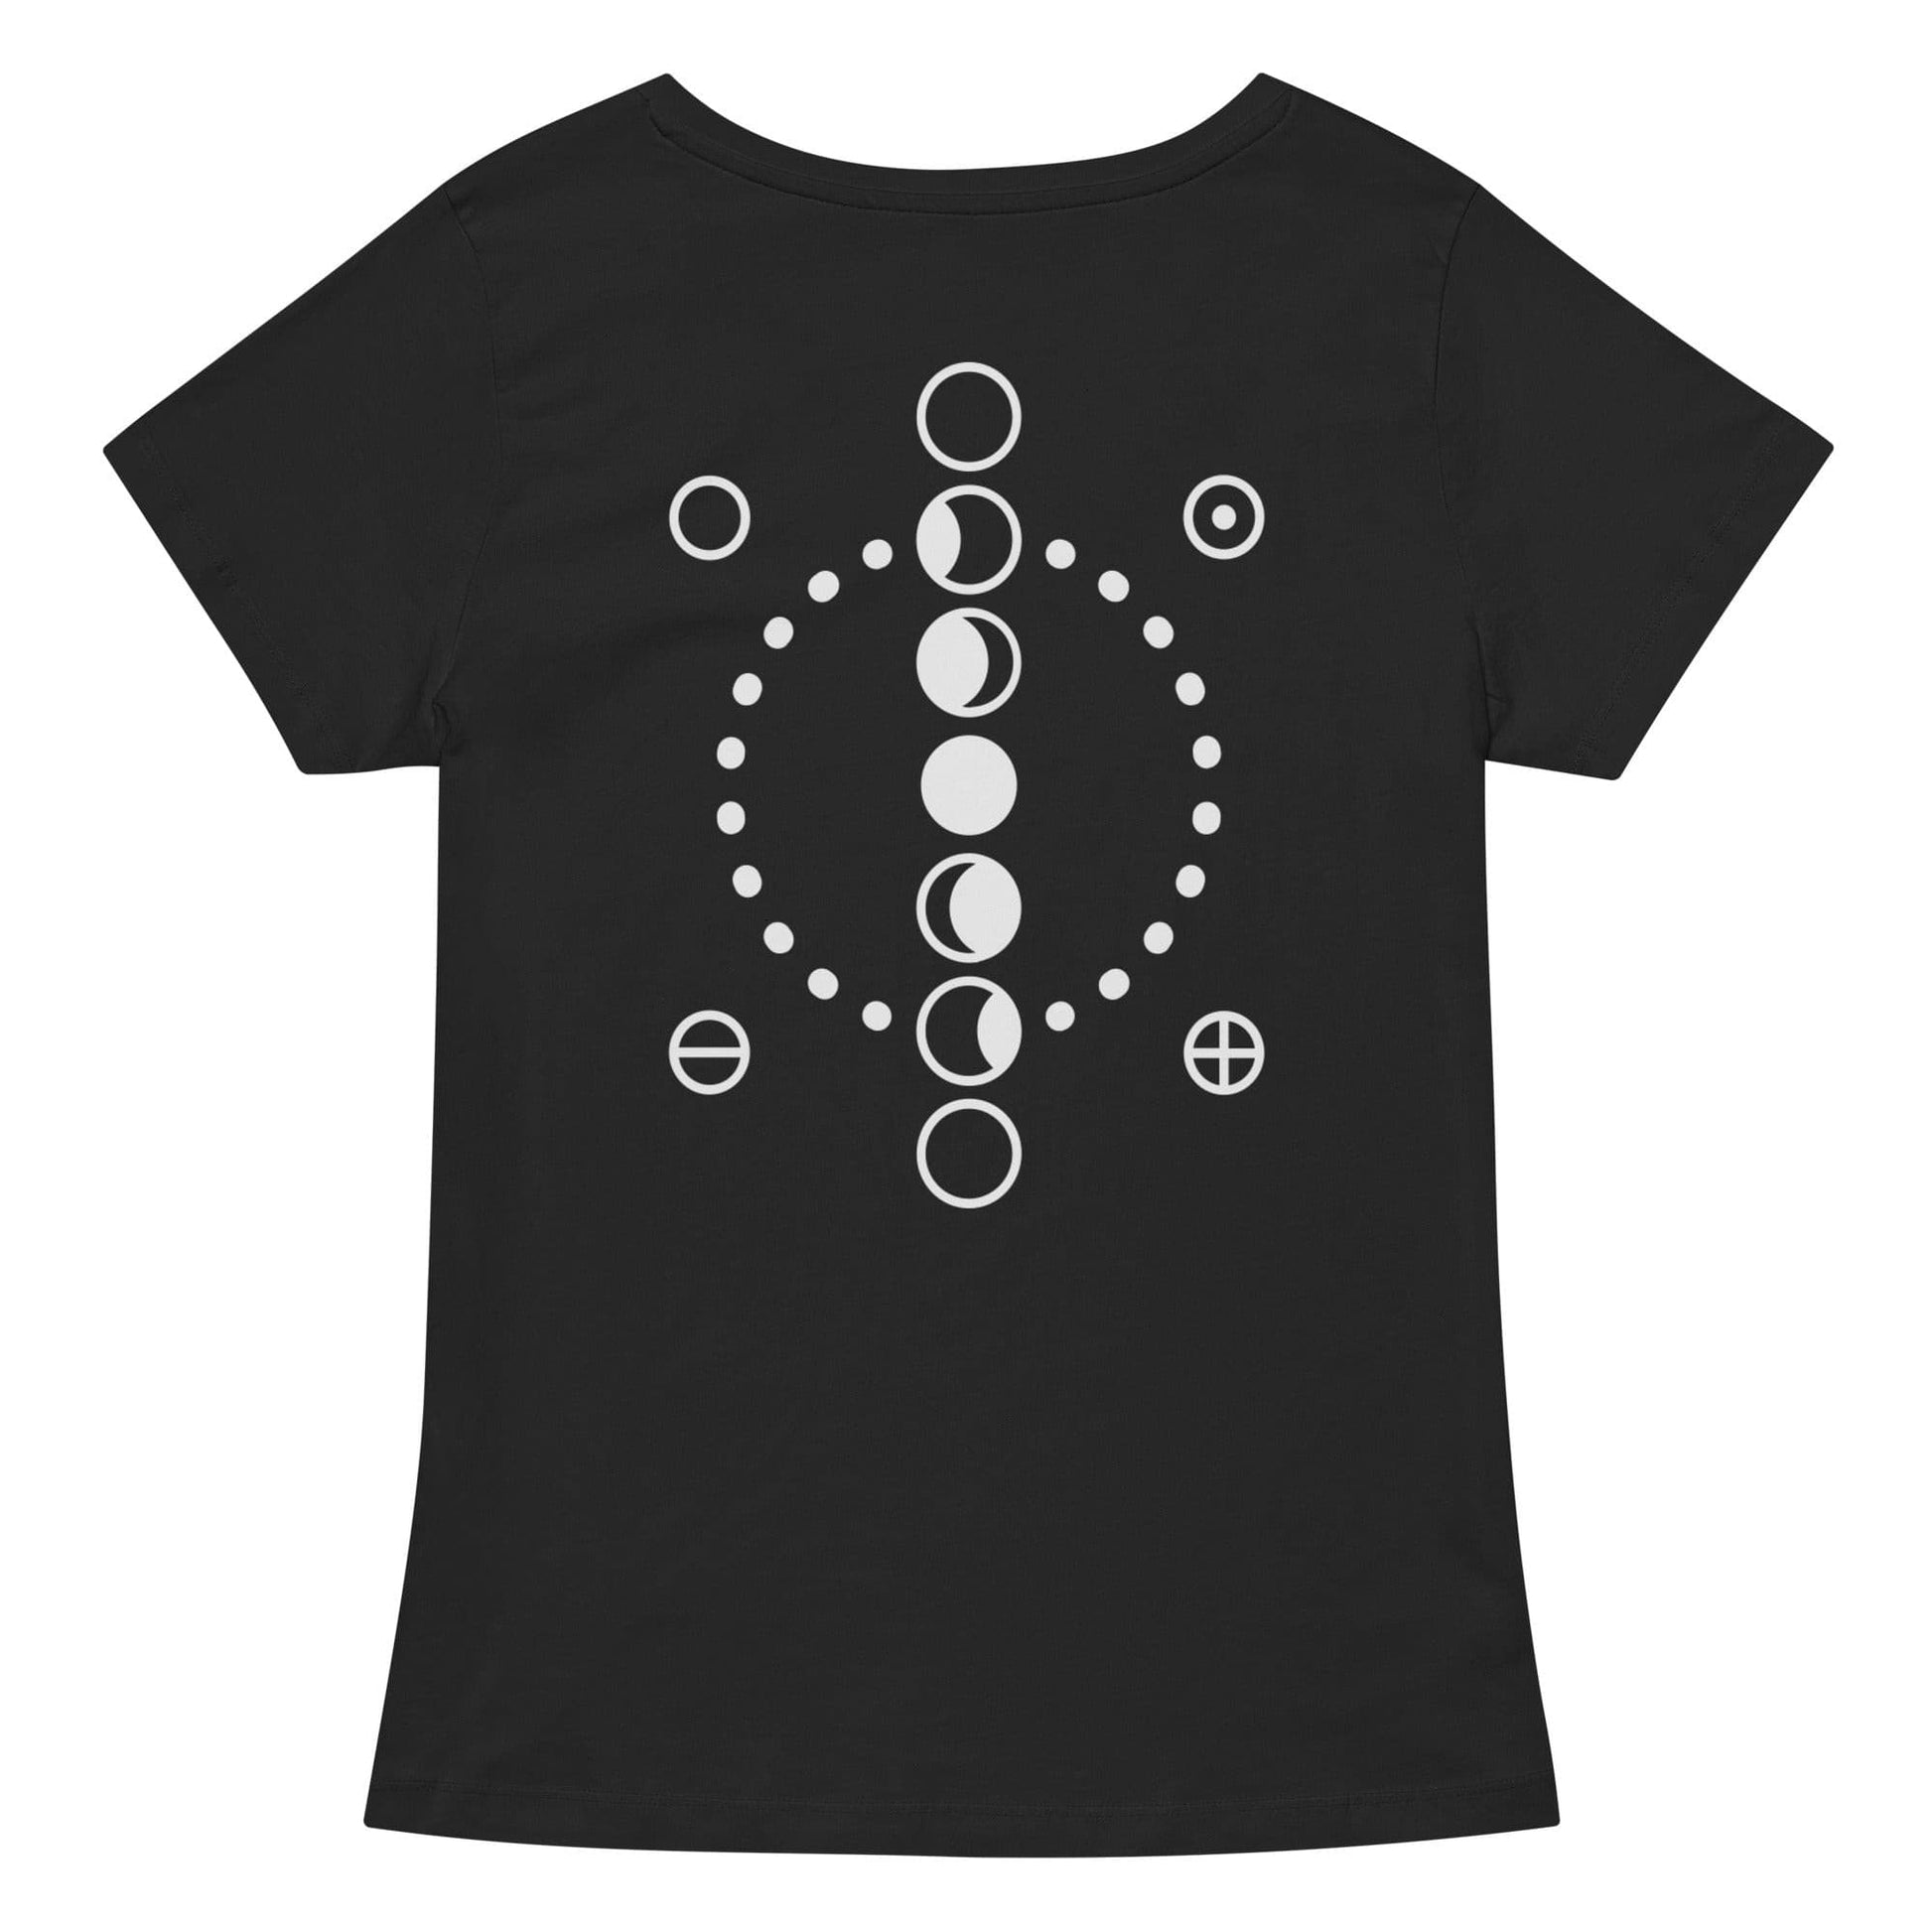 Moon Phases Women’s fitted v-neck t-shirt.